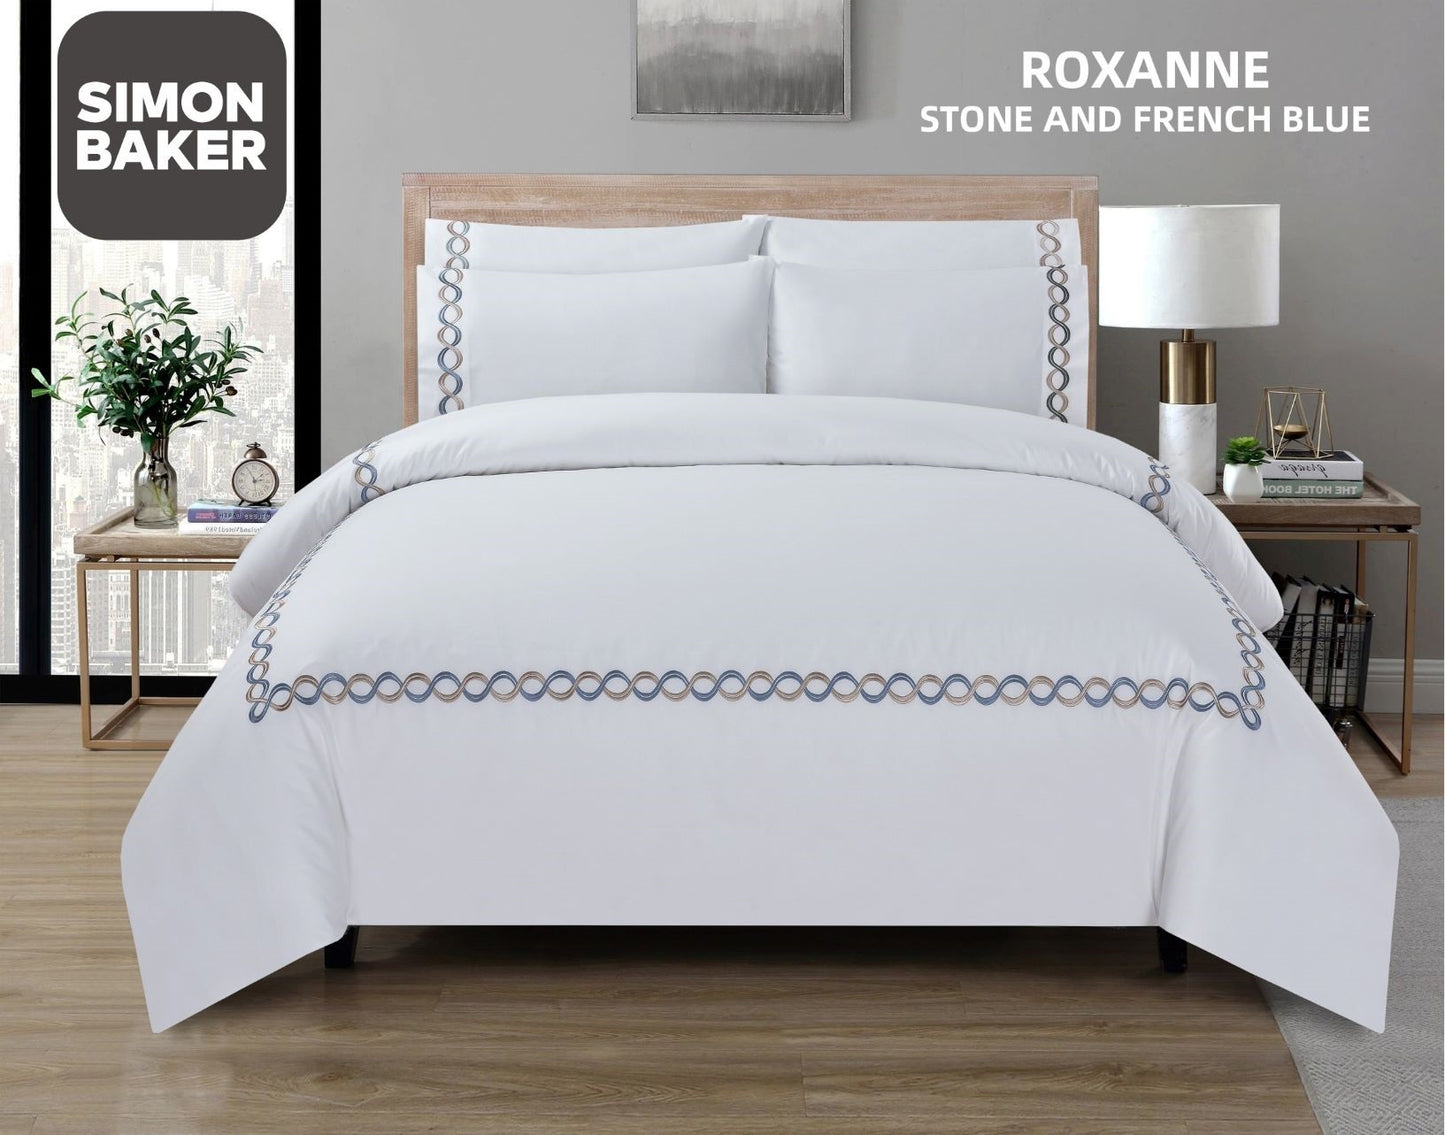 Simon Baker | T200 Cotton Percale Embroidered Duvet Cover Set - Roxanne French Blue/Stone (Various Sizes)